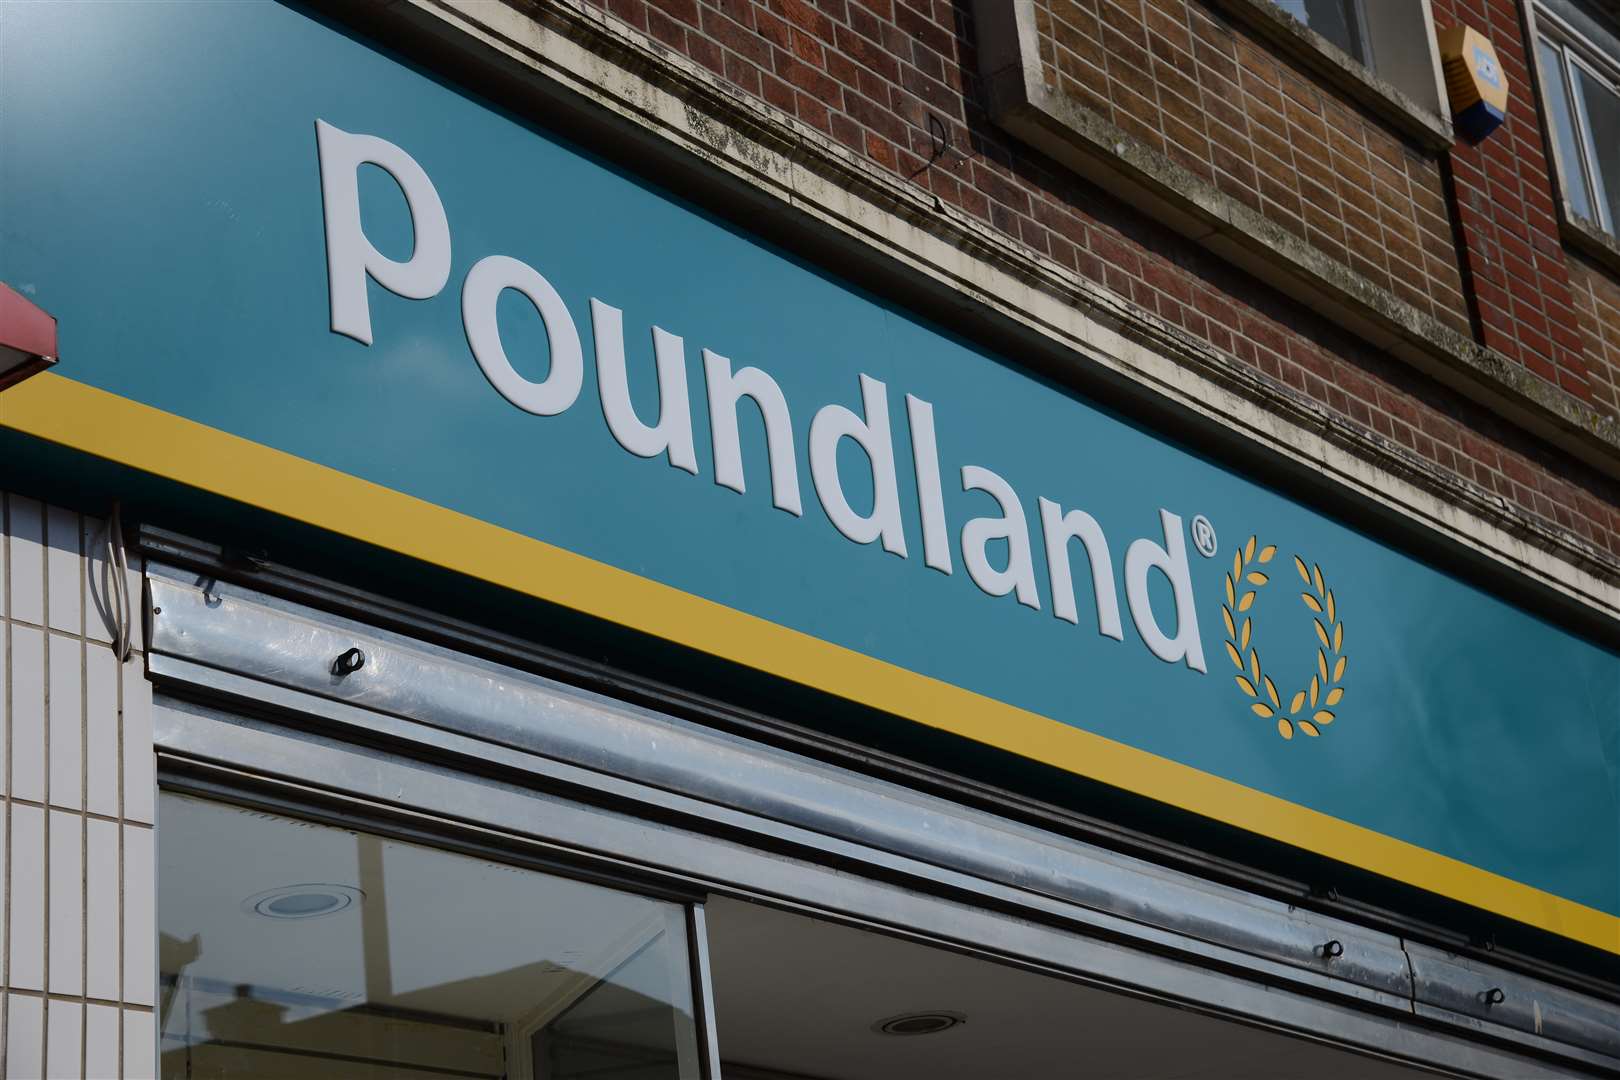 Poundland aims to become a top 15 clothing retailer with the rollout of Pep&Co concessions within its stores